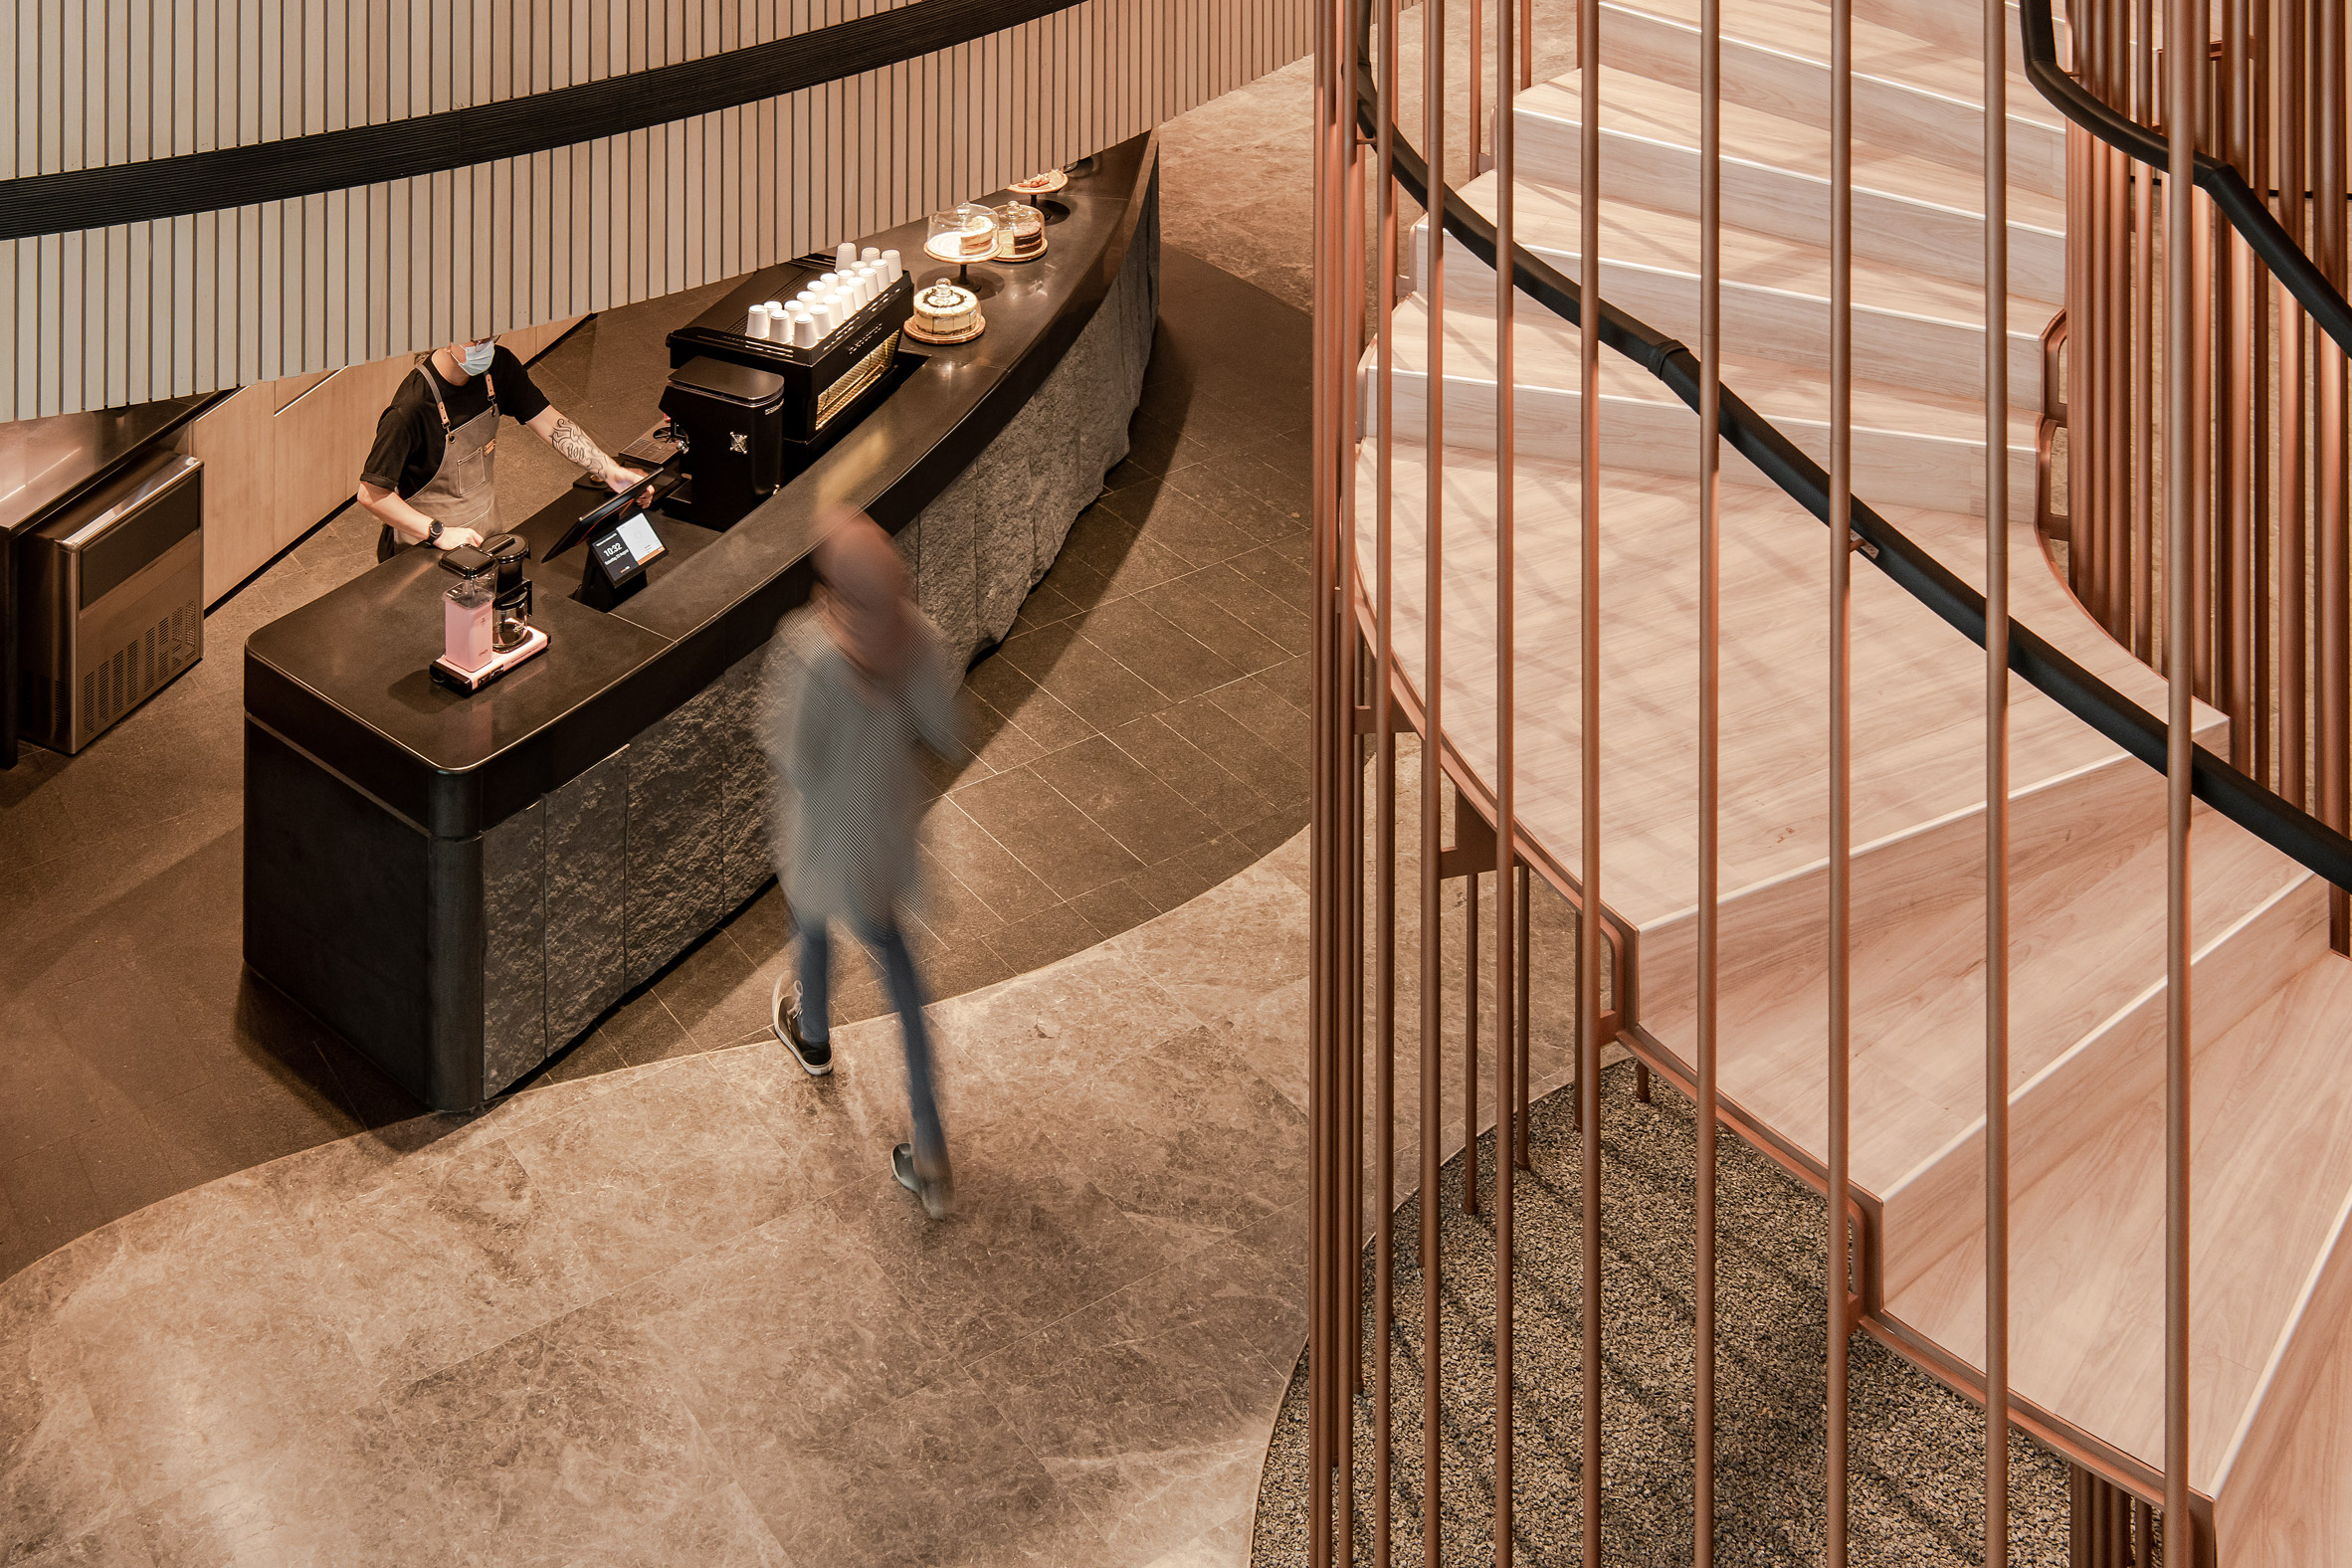 The cafe and staircase by Ministry of Design inside YTL Headquarters in Kuala Lumpur